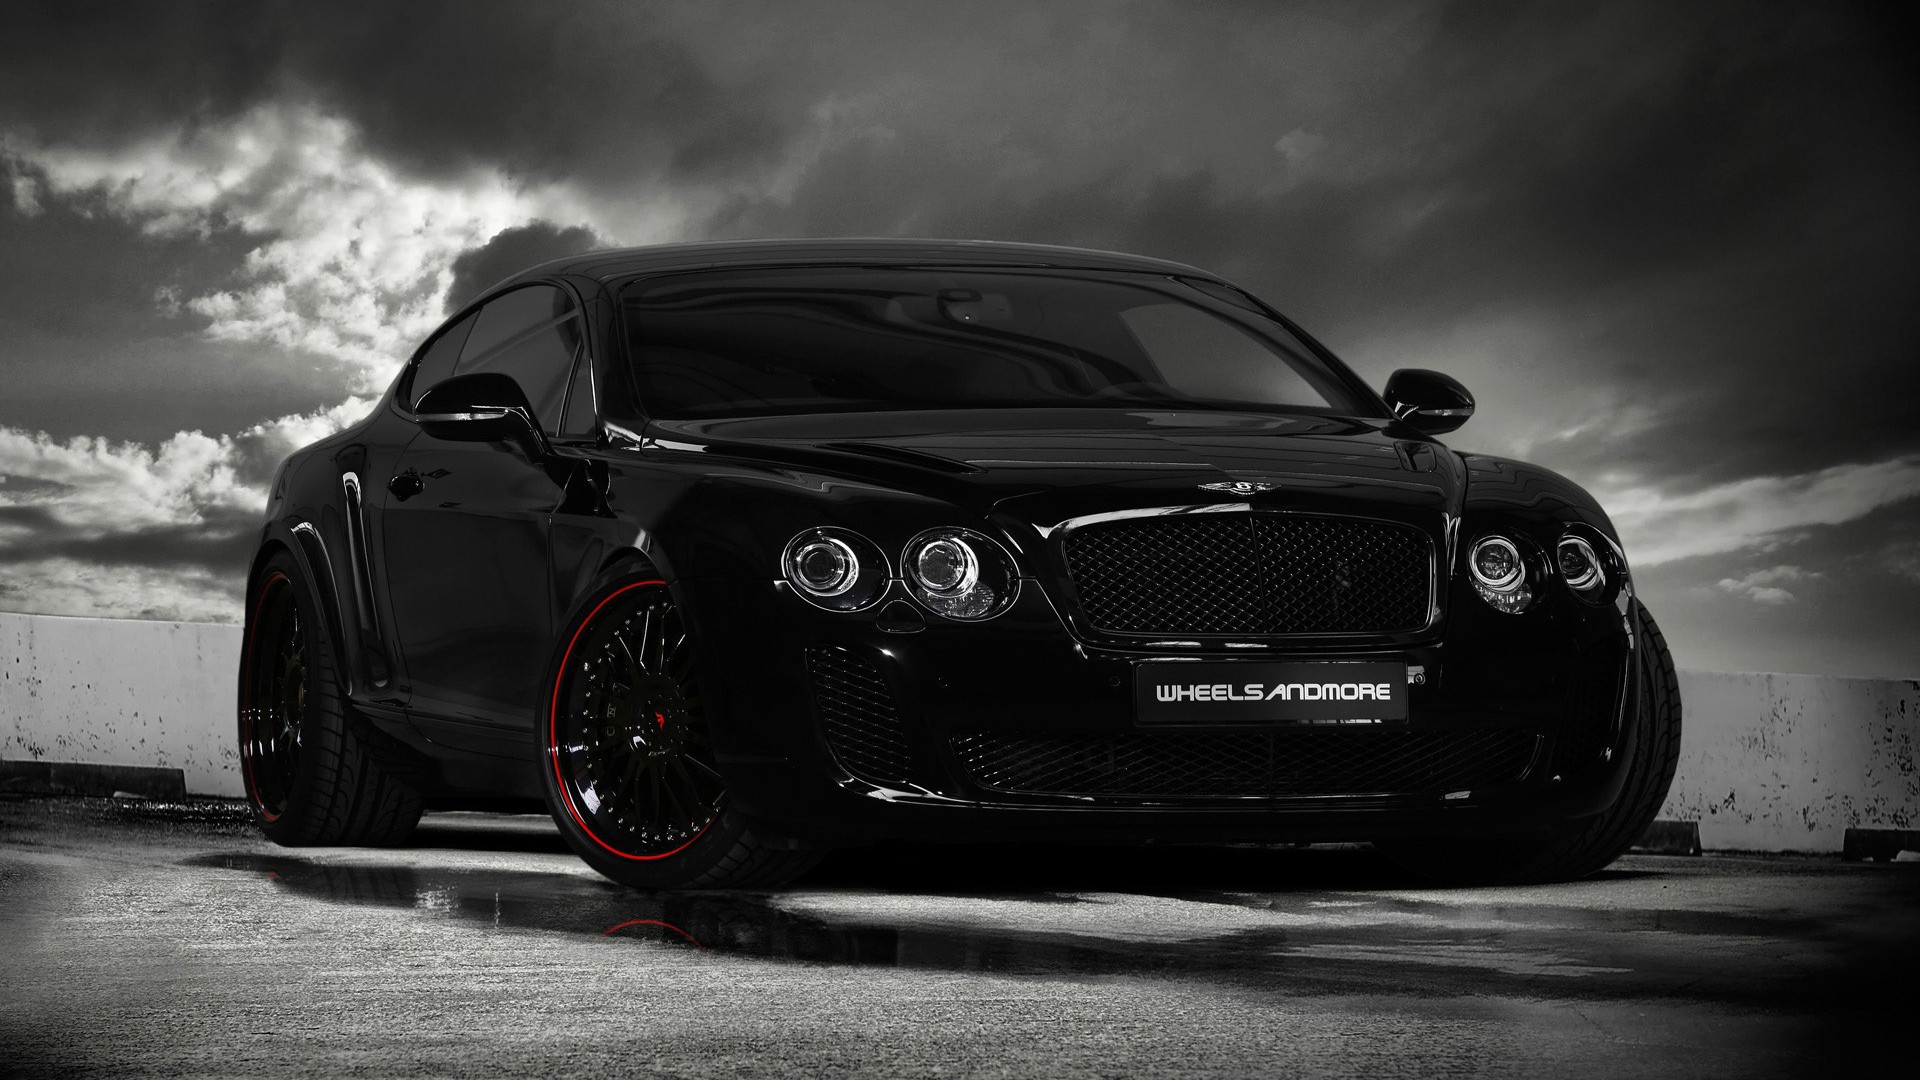 Download Black Car Wallpapers 32689 1920x1080 px High Resolution ...